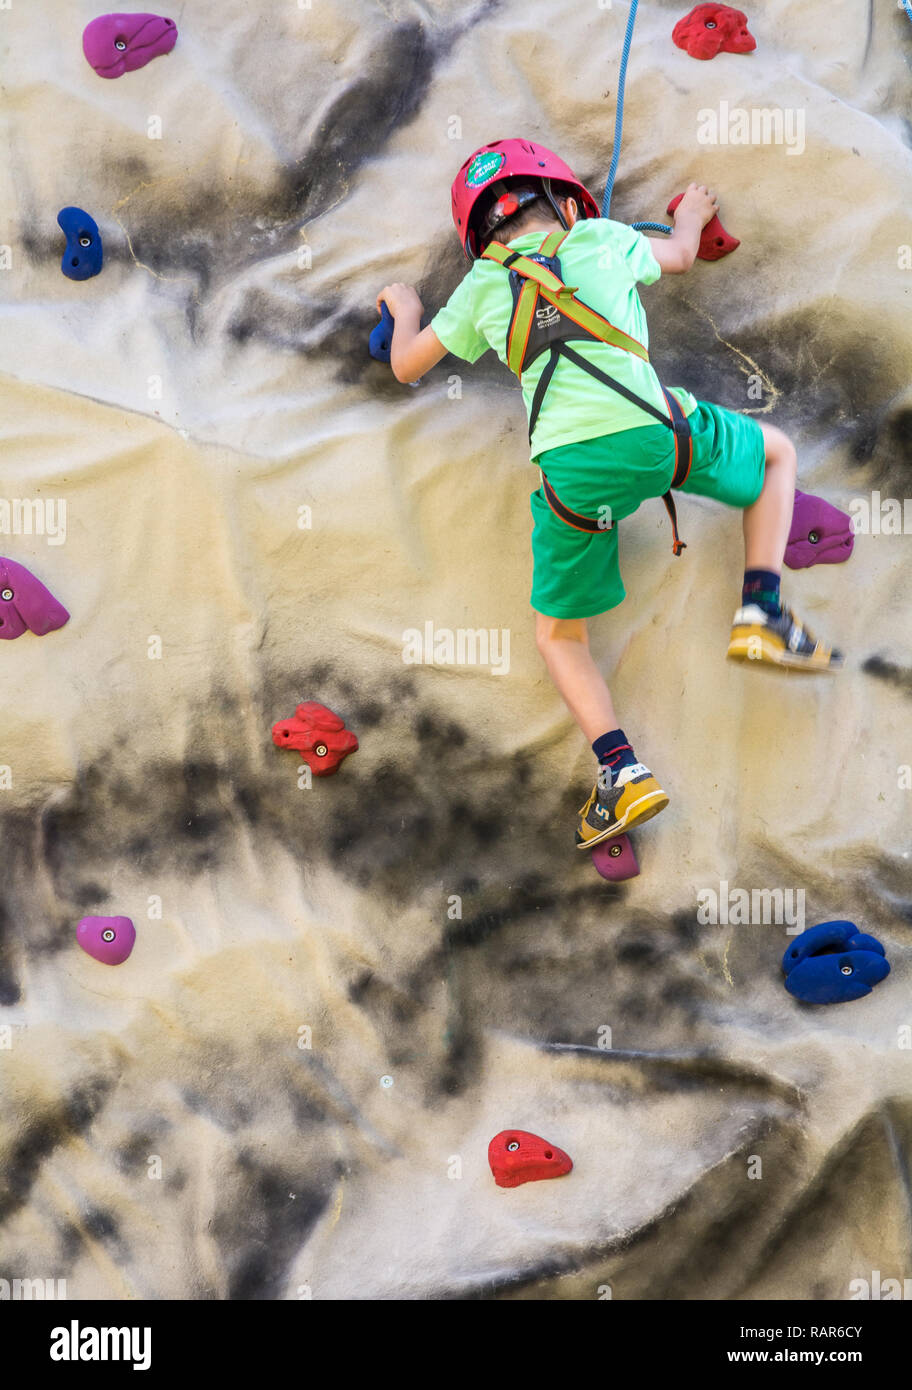 shot of little boy in a harness climbing a wall with grips. Stock Photo